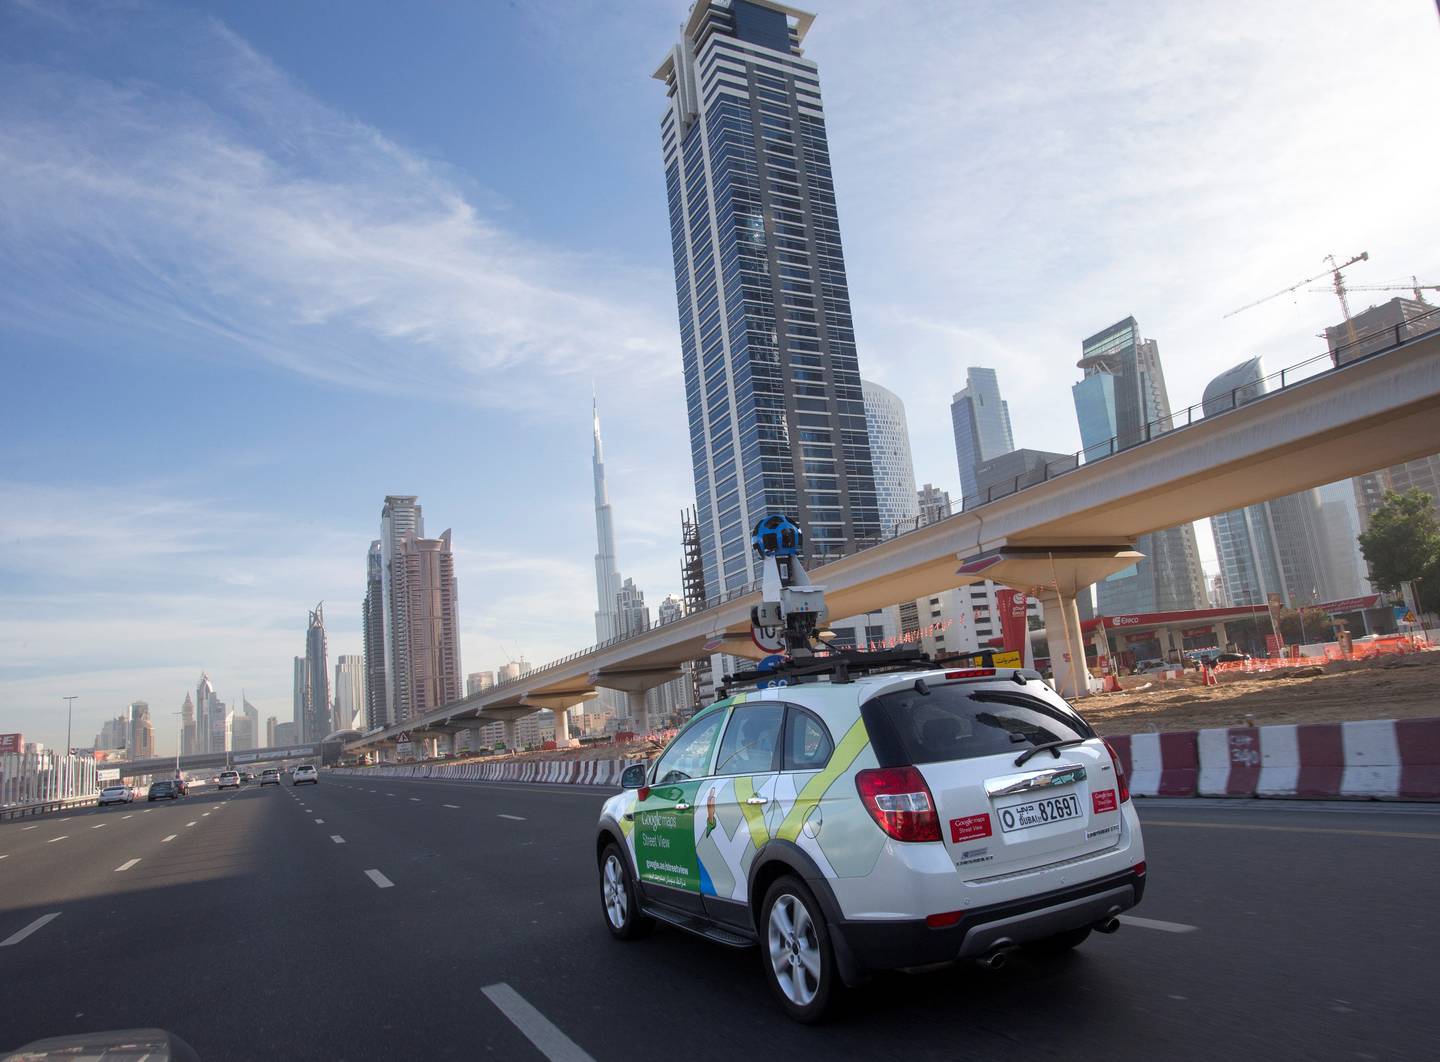 Google Reveals 10 Most-Visited Places on Street View in the MENA Region